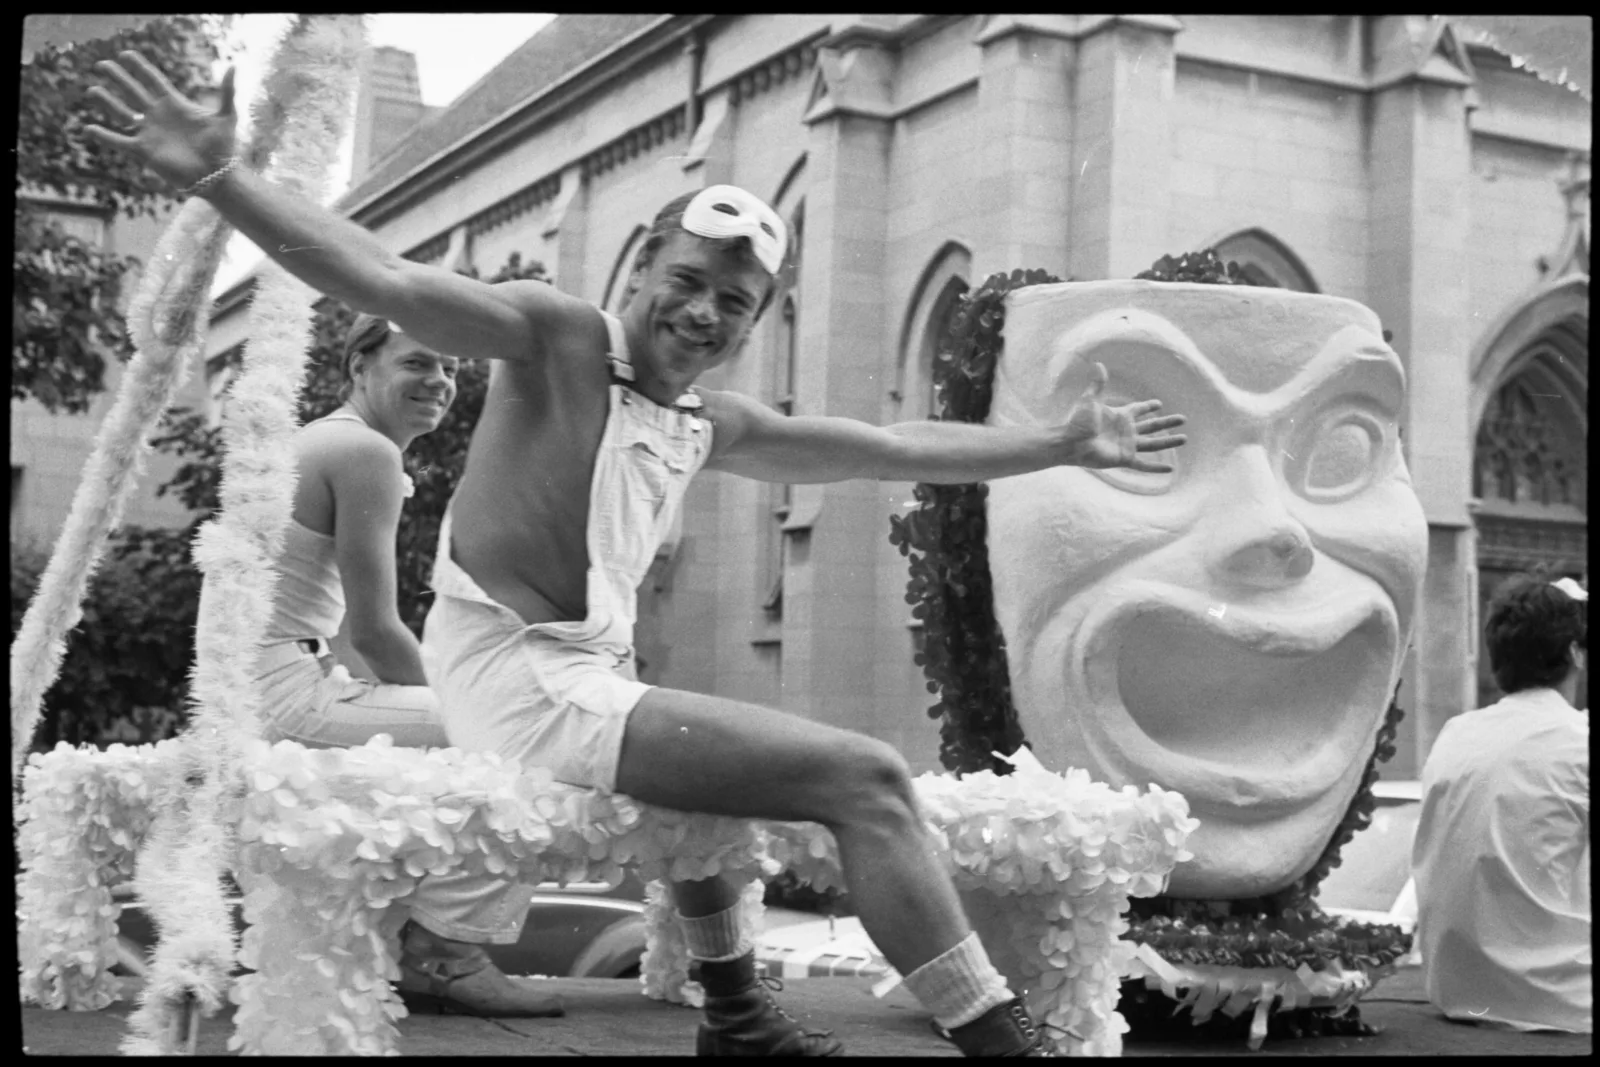 Two men dressed in white sit on a float in the parade. The float has a big mask on it.